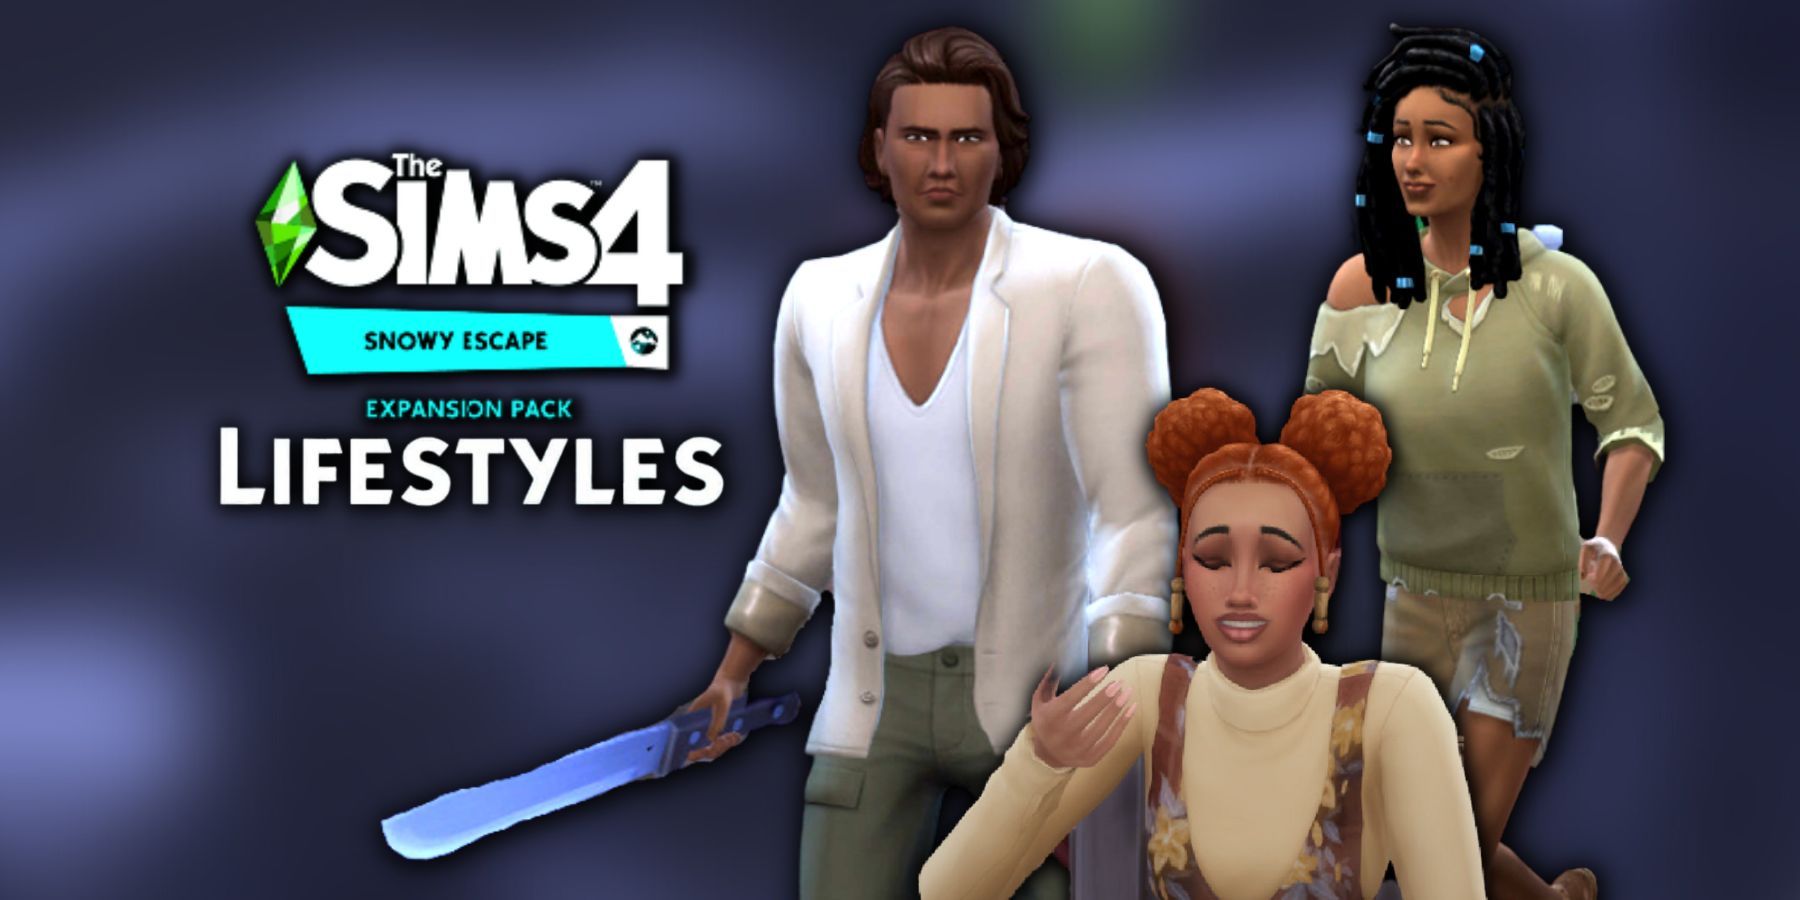 The Sims 4 snowy escape lifestyles